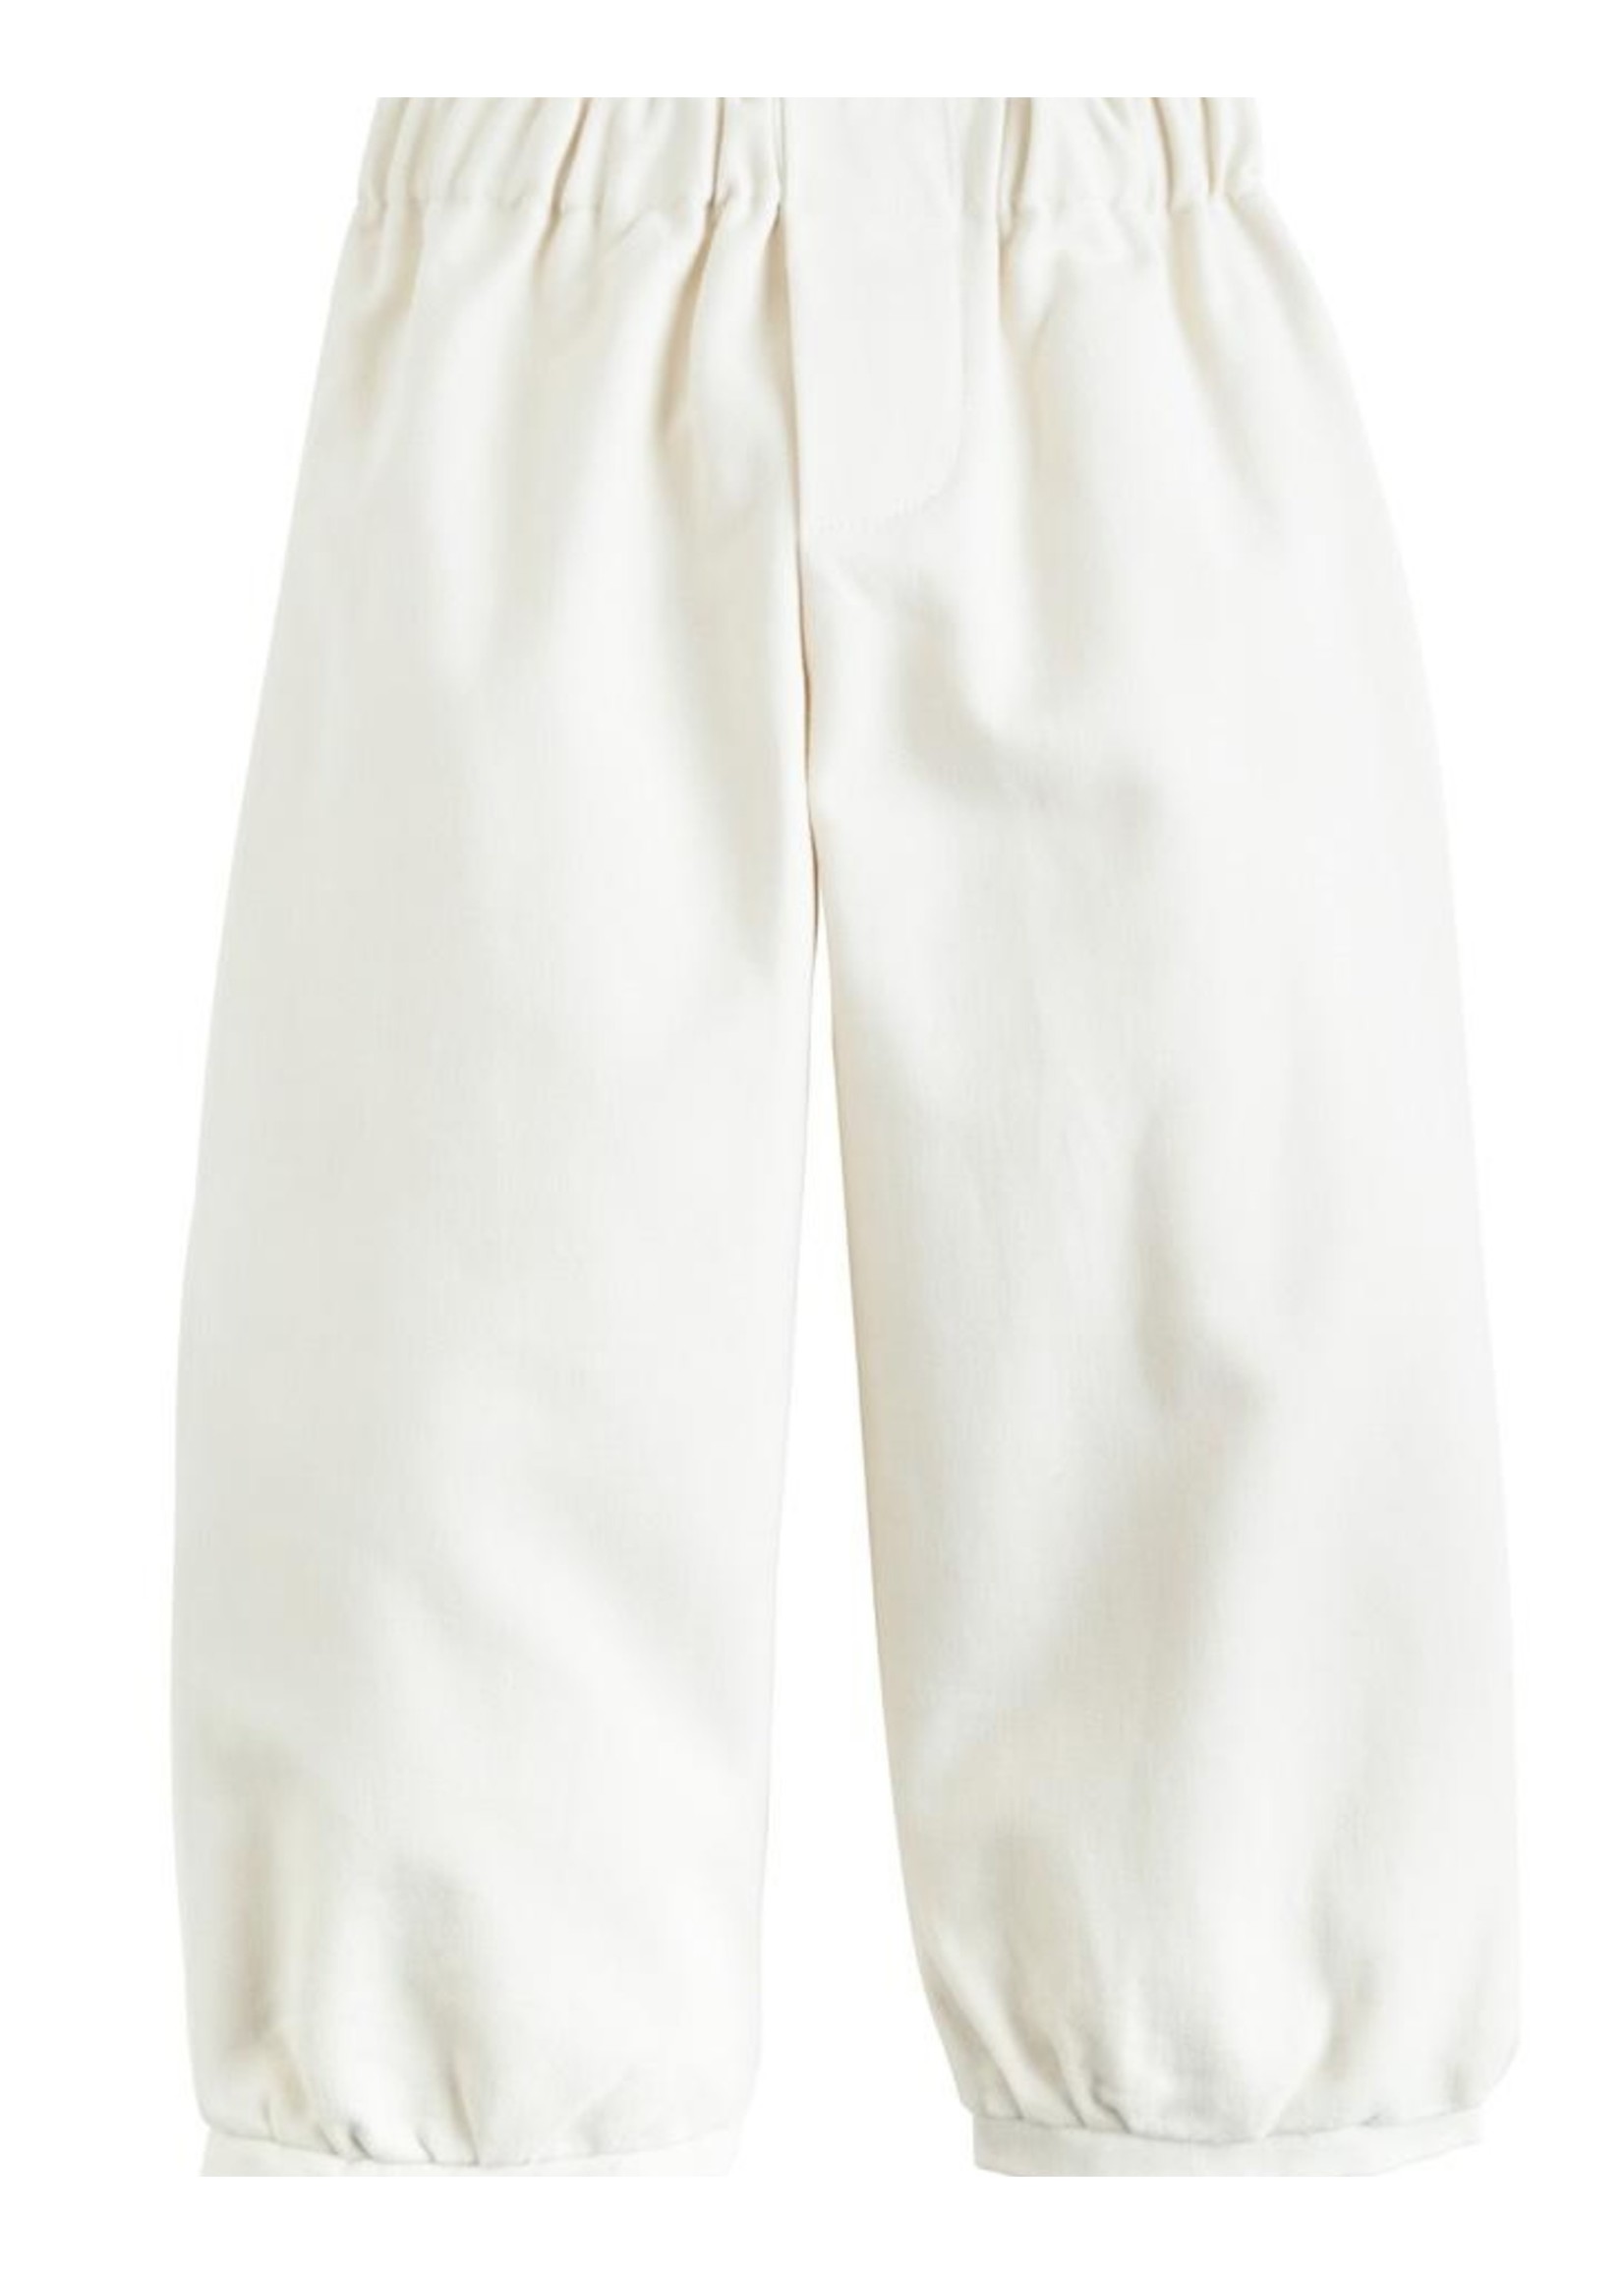 Little English Little English Banded Pull on Pant- Pebble Twill